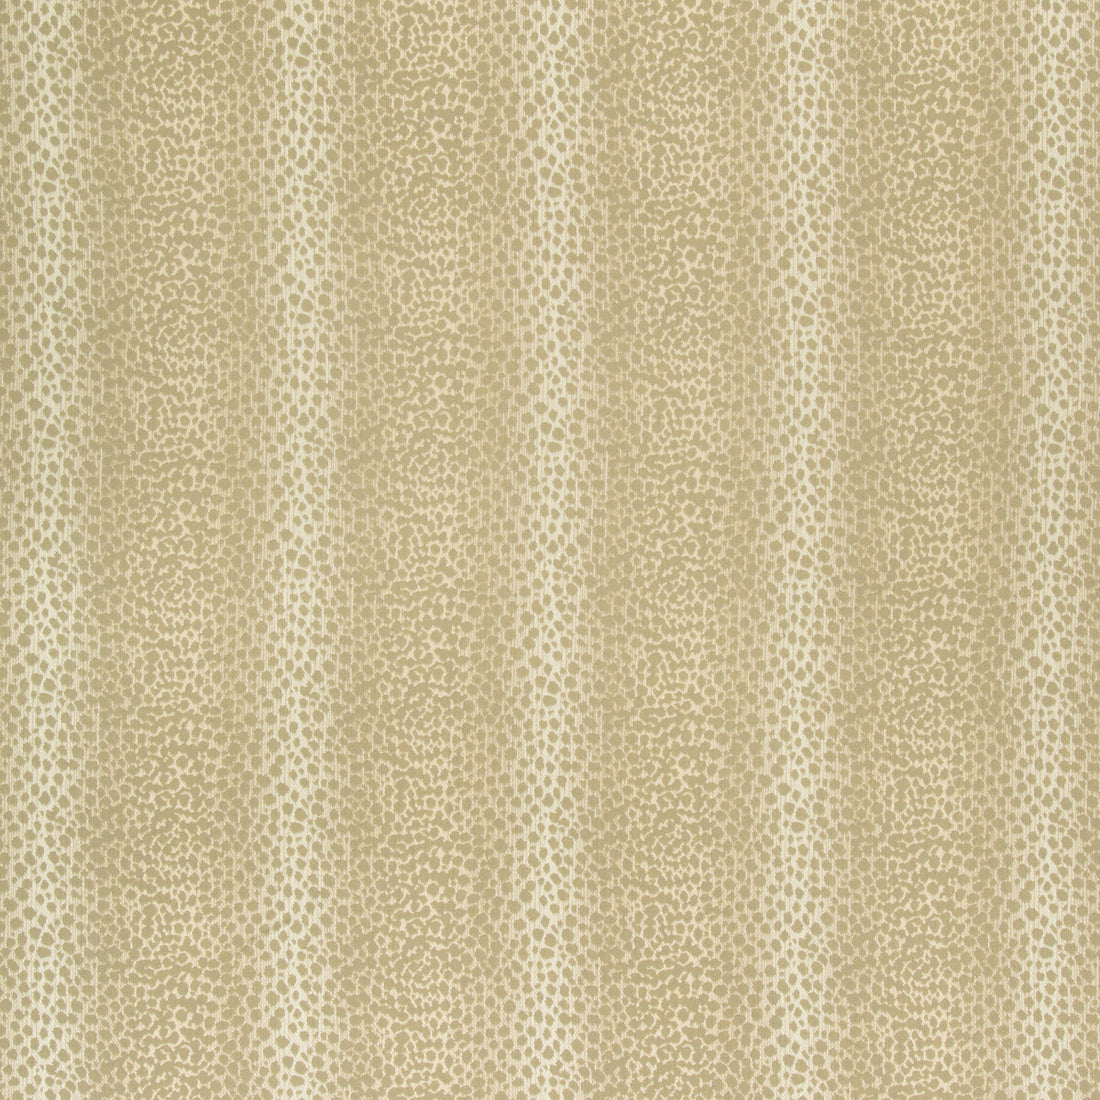 Kravet Design fabric in 34970-16 color - pattern 34970.16.0 - by Kravet Design in the Performance Crypton Home collection